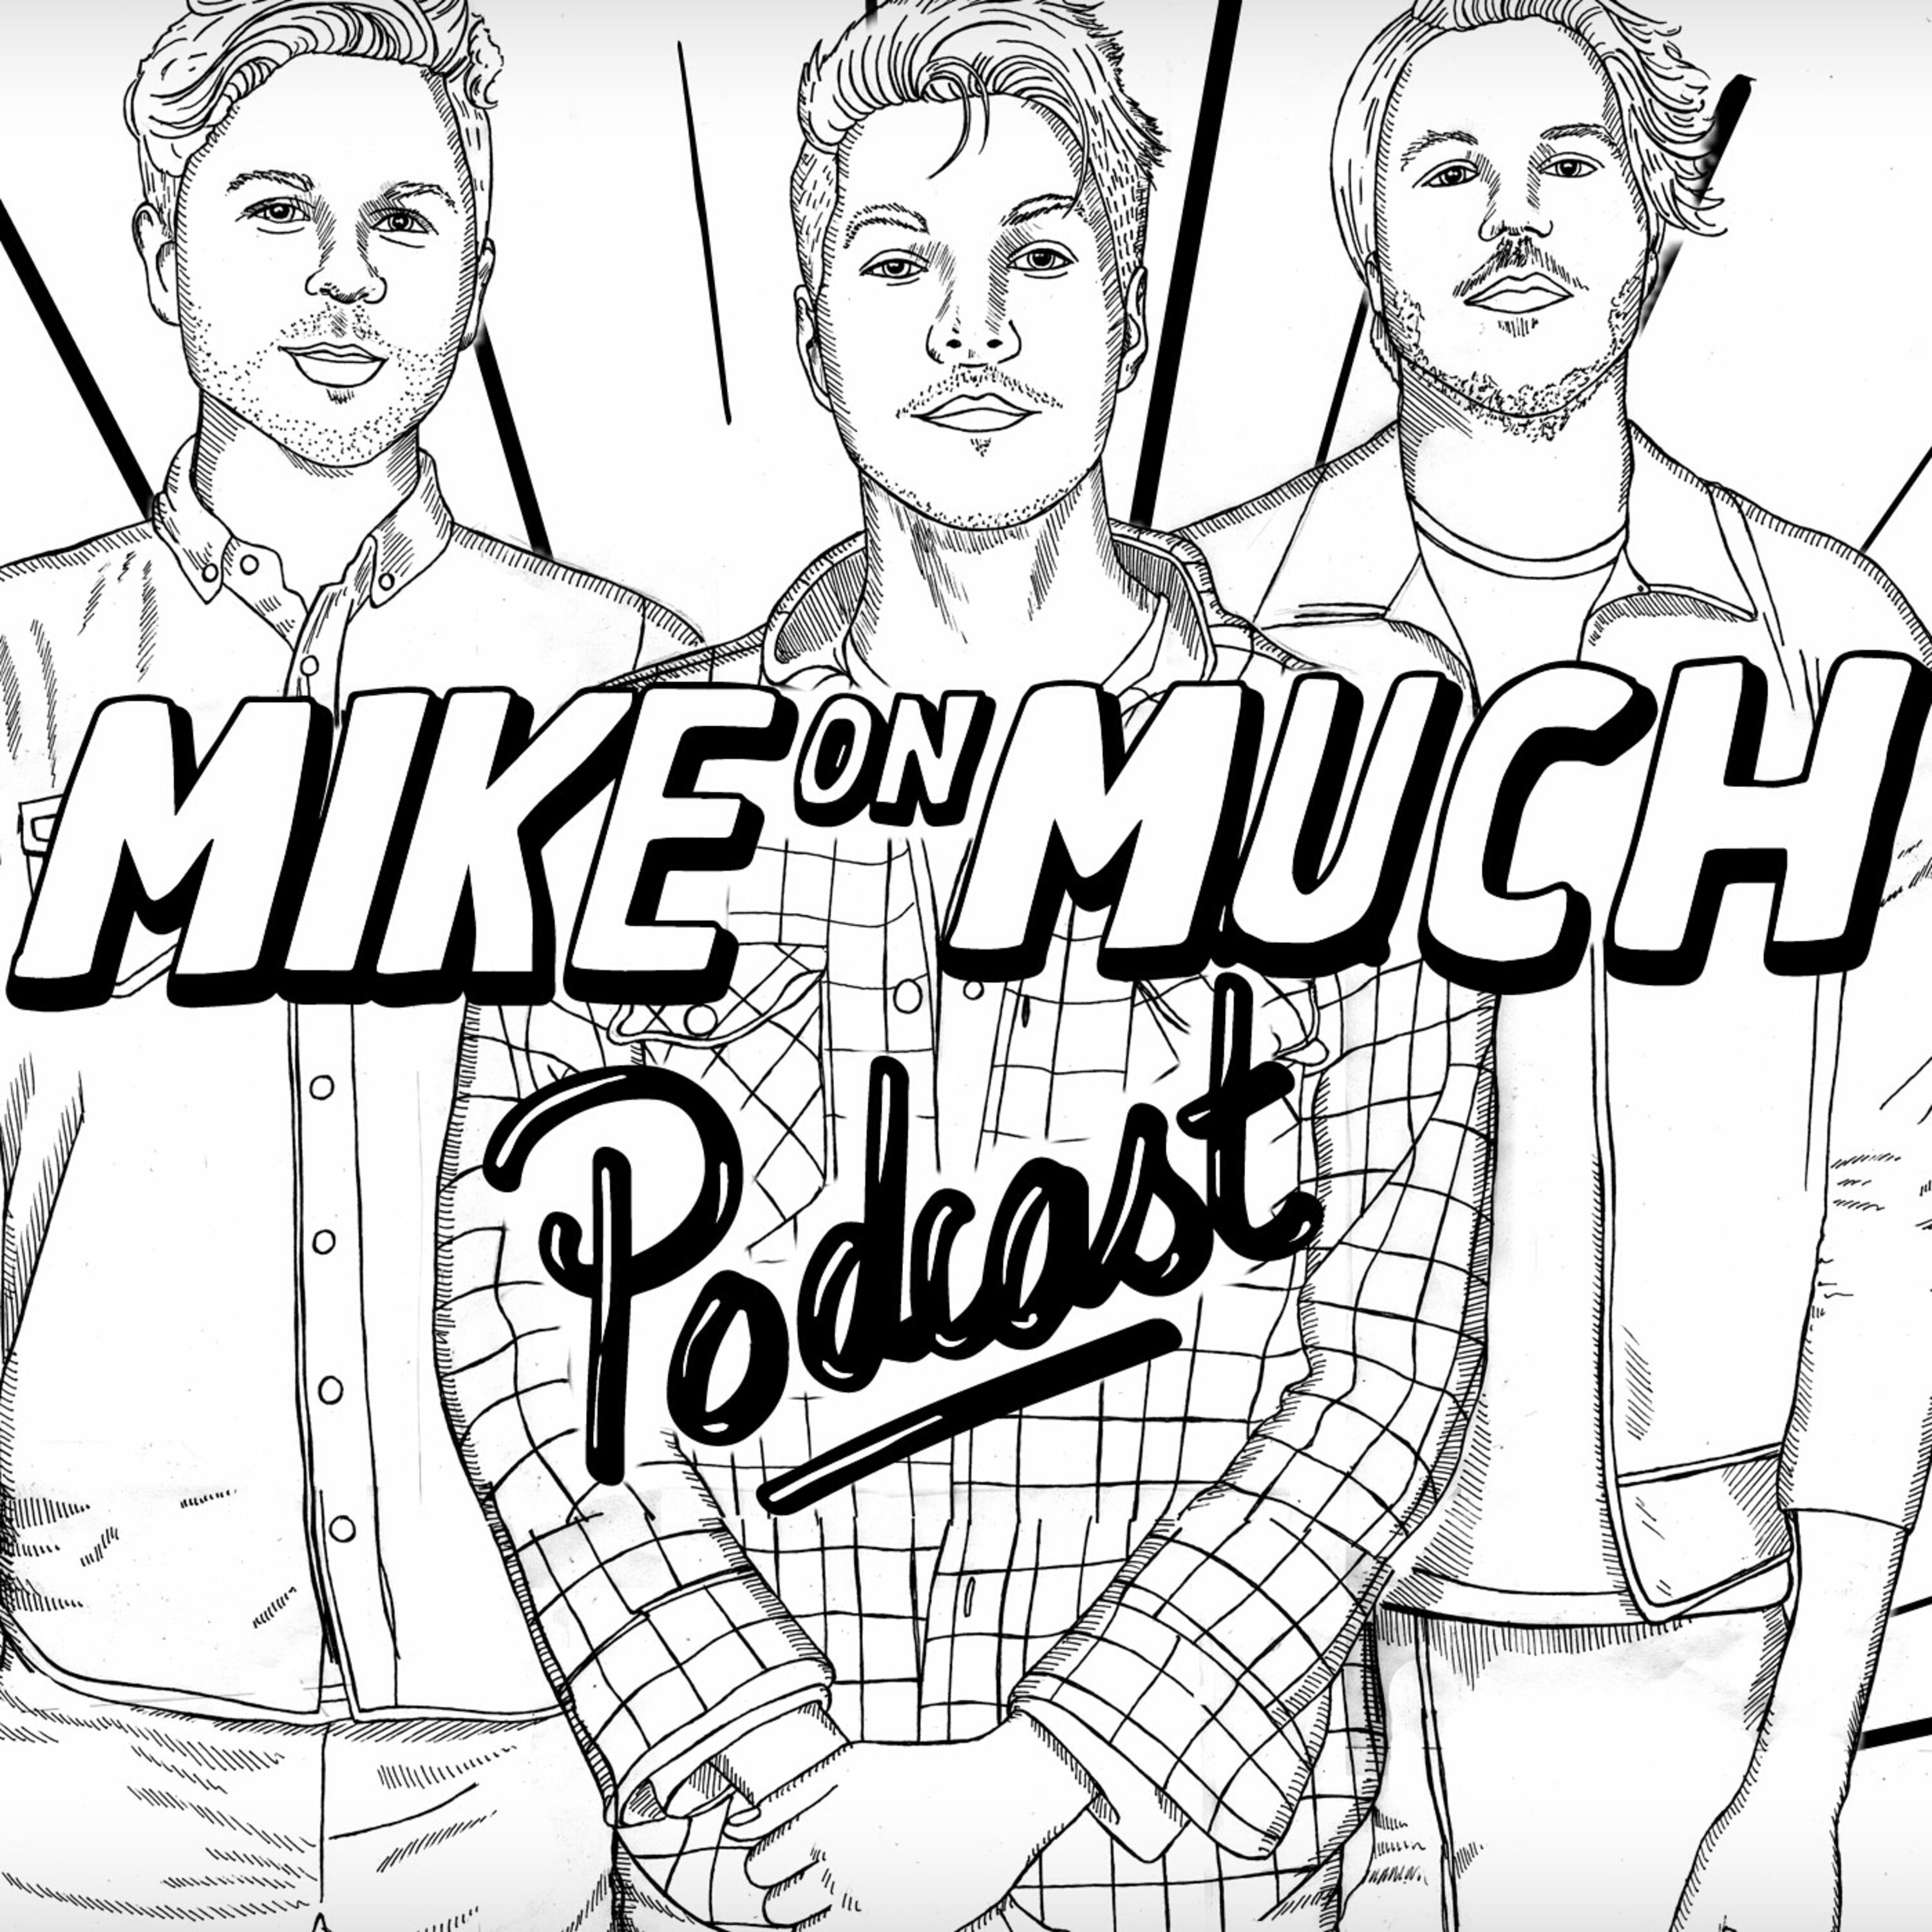 Season 1 Mike On Much: “He’ll Just Scoot off With Your Cash”